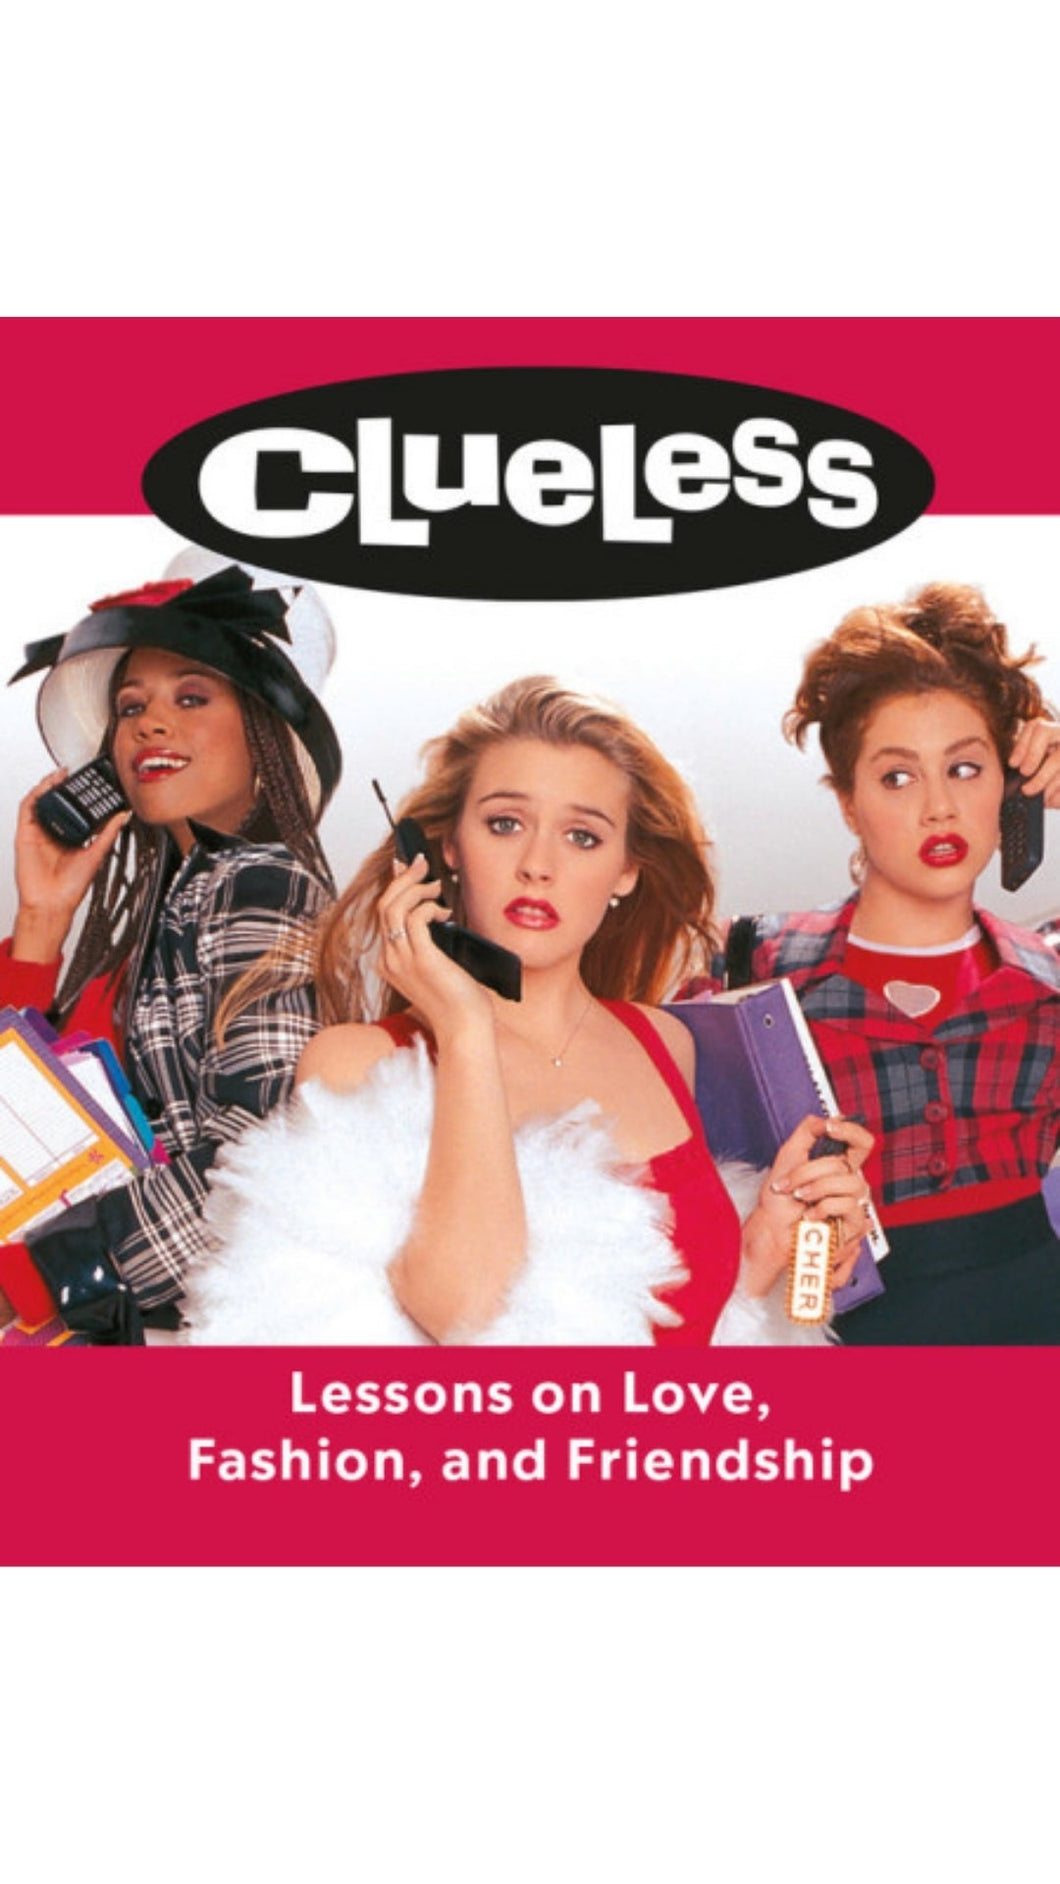 Clueless: Lessons on Love, Fashion, and Friendship Book